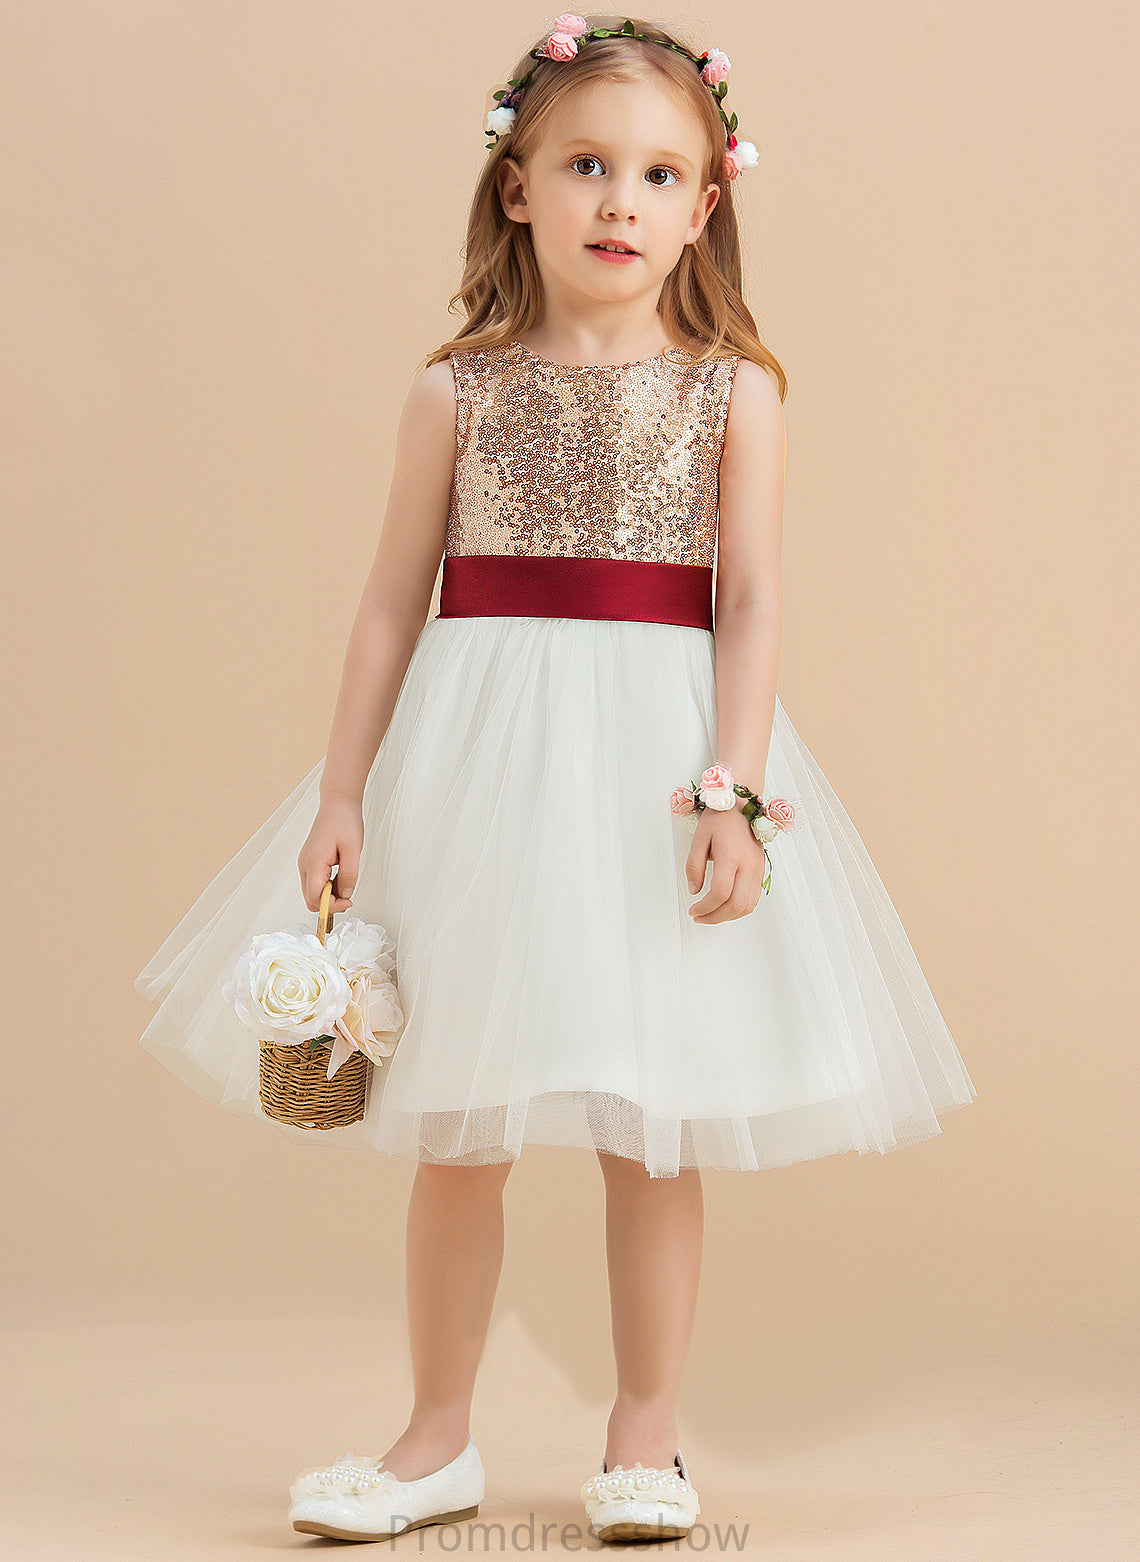 A-Line With Satin/Tulle/Sequined sash) Knee-length - Flower Flower Girl Dresses Girl Neck Sequins/Bow(s) Scoop Amiah Dress (Undetachable Sleeveless